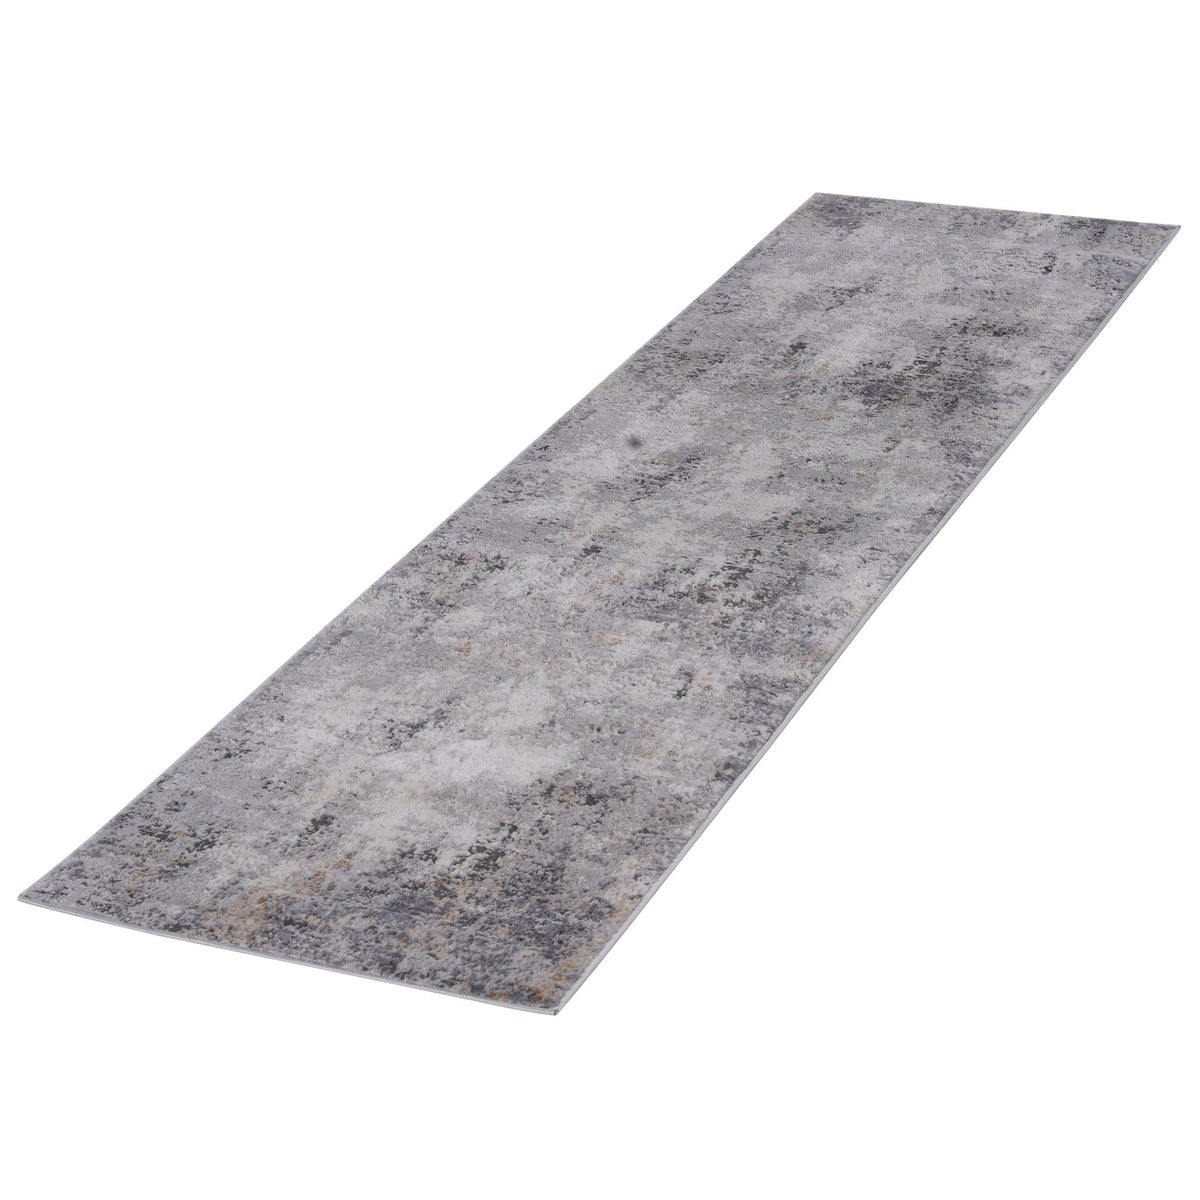 Marfi Sand-Ivory Runner Rug Size 2'2''x 8' | Mid in Mod | Houston TX | Best Furniture stores in Houston